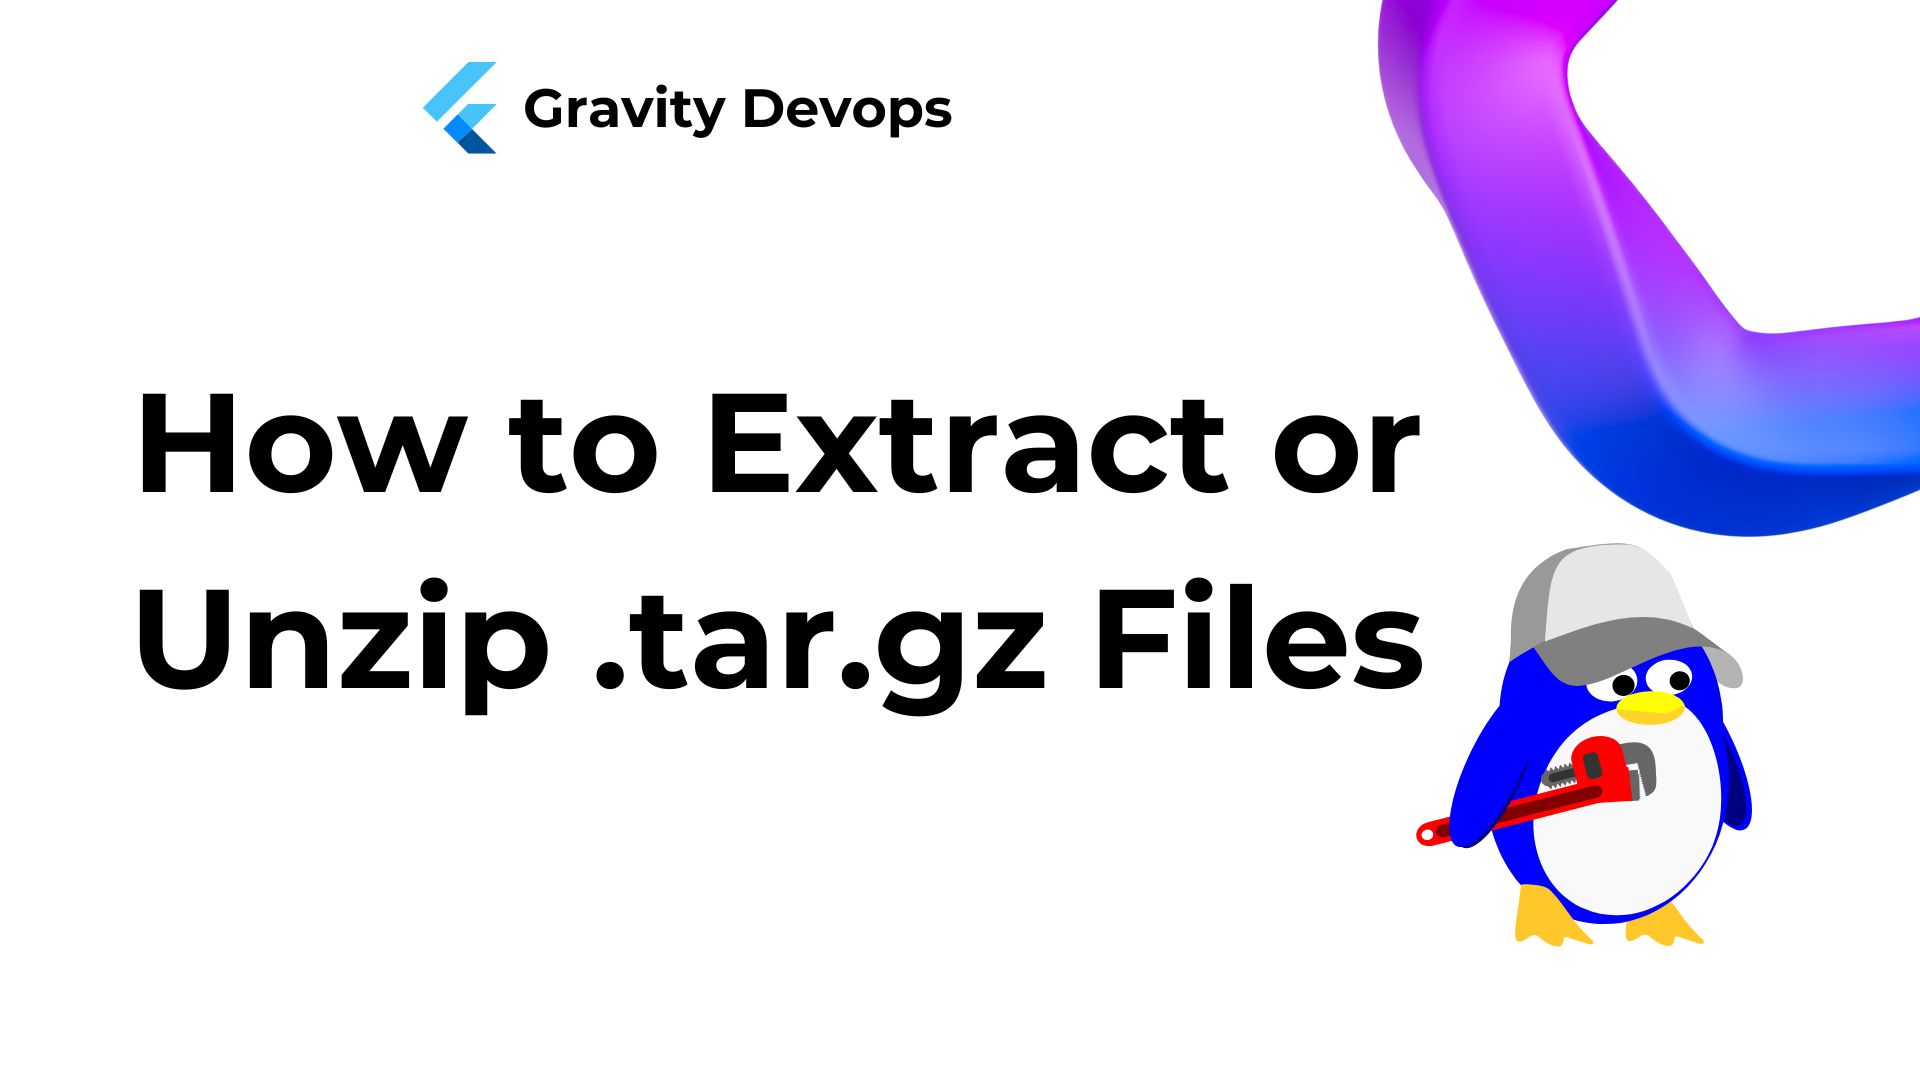 How to Extract or Unzip .tar.gz Files in Linux